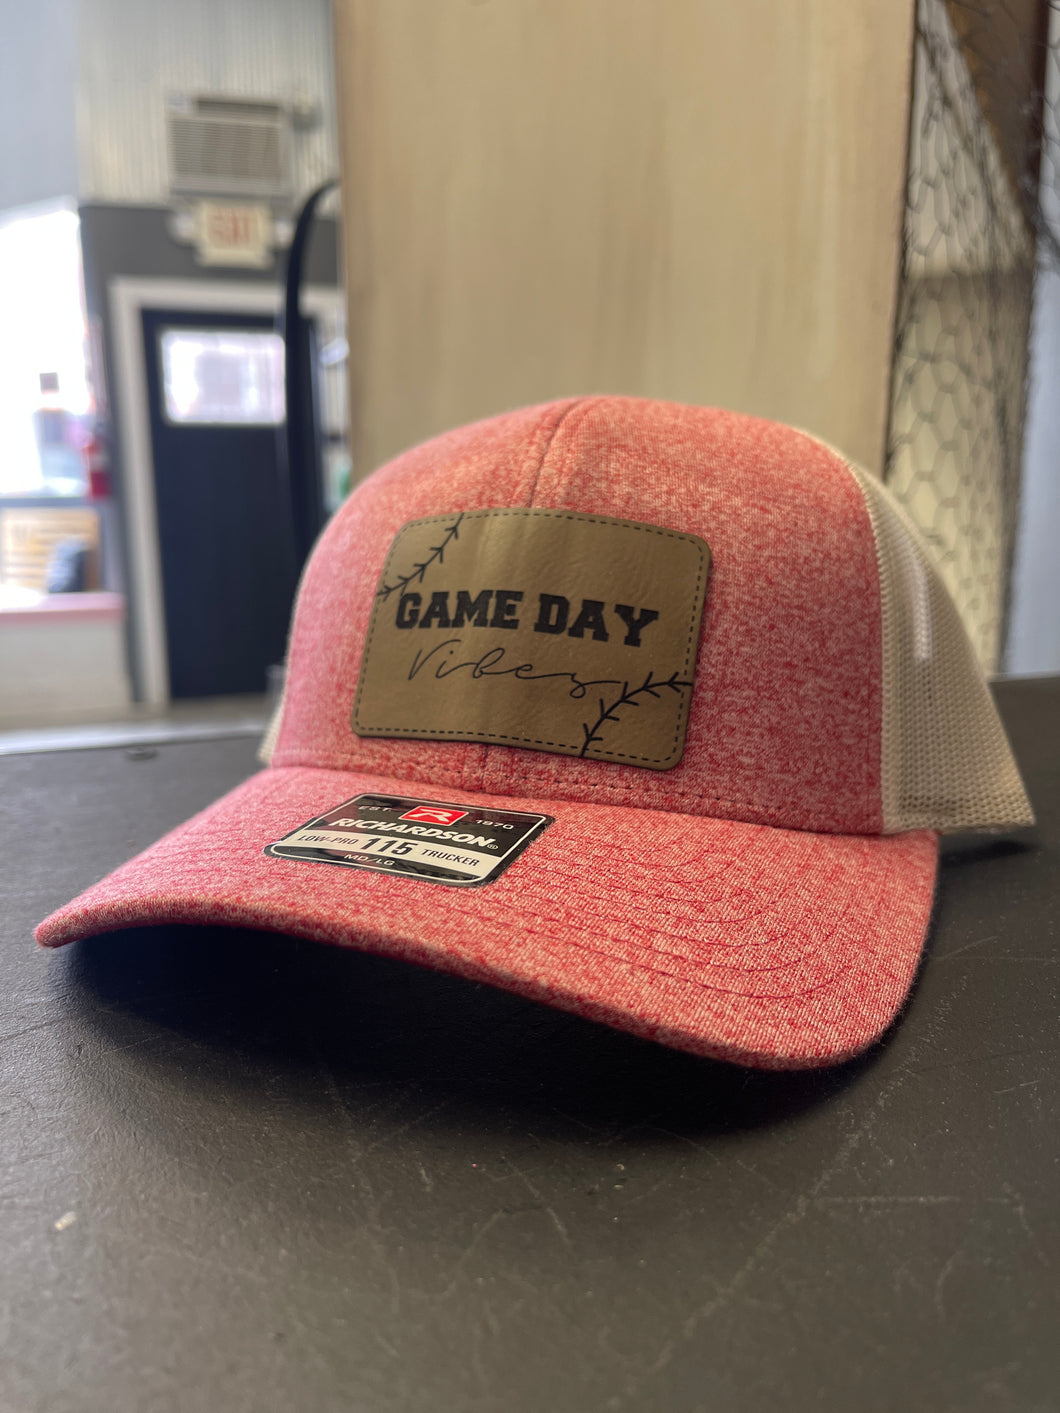 Game day vibes hat